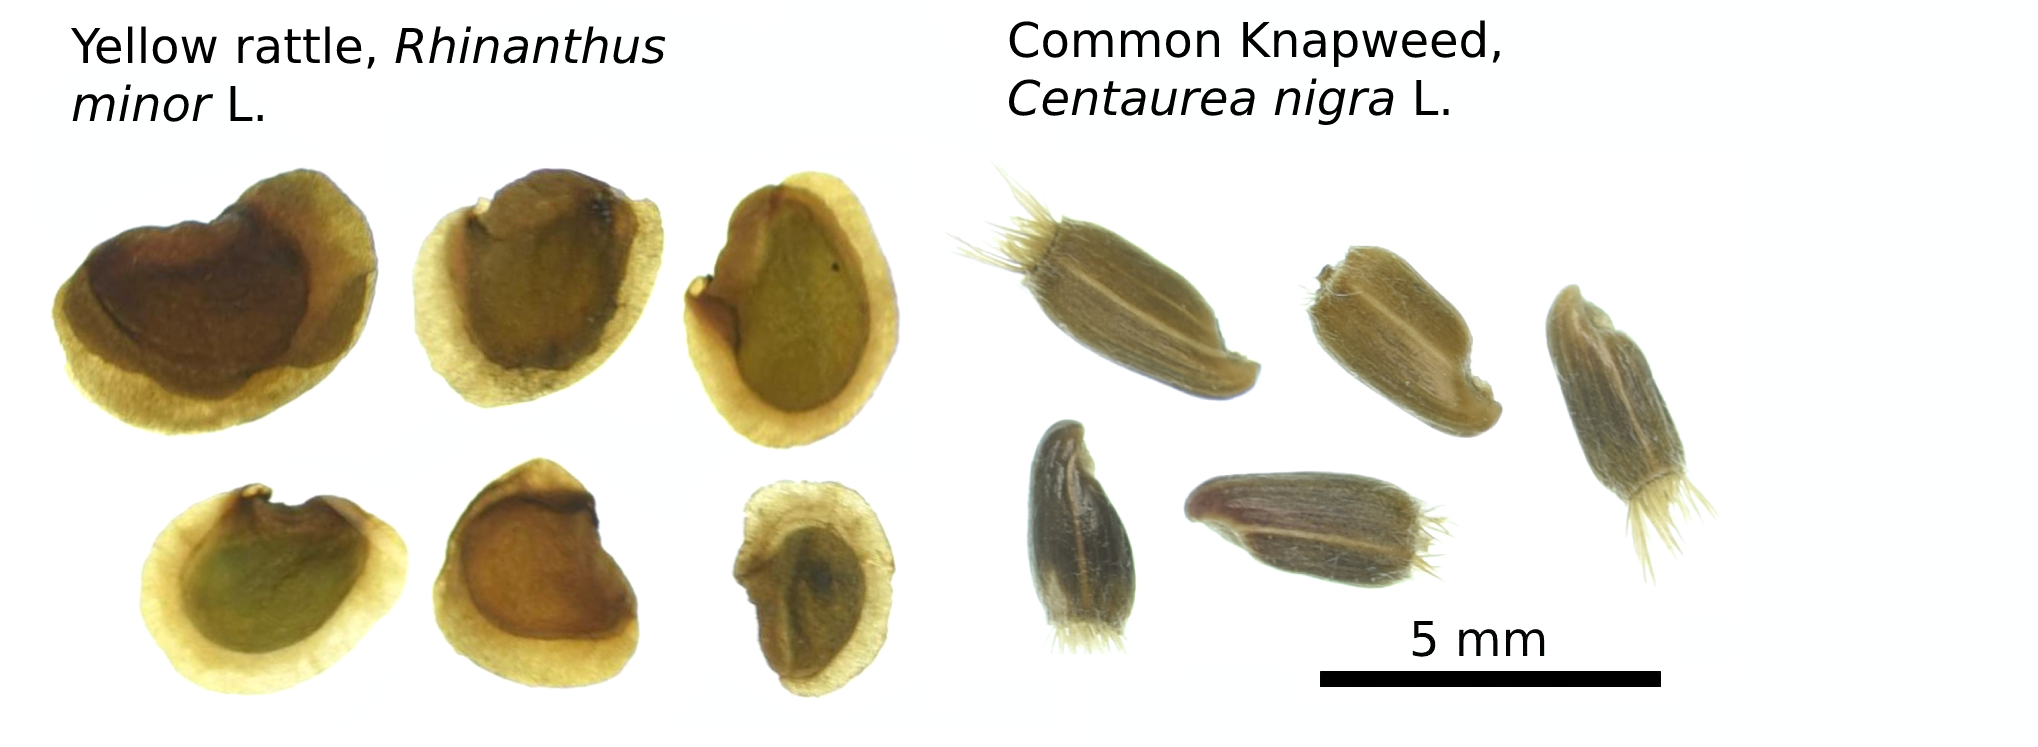 Two sets of seeds next to each other, the first is labelled Yellow Rattle, Rhinanthus minor L. the seeds are kidney shaped with a darker centre and are approximately 3 to 4 mm long. The second set of seeds are labelled Common Knapweed, Centaurea nigra L. and are oval shaped with fine hairs from one end, they are approximately 3mm in length.